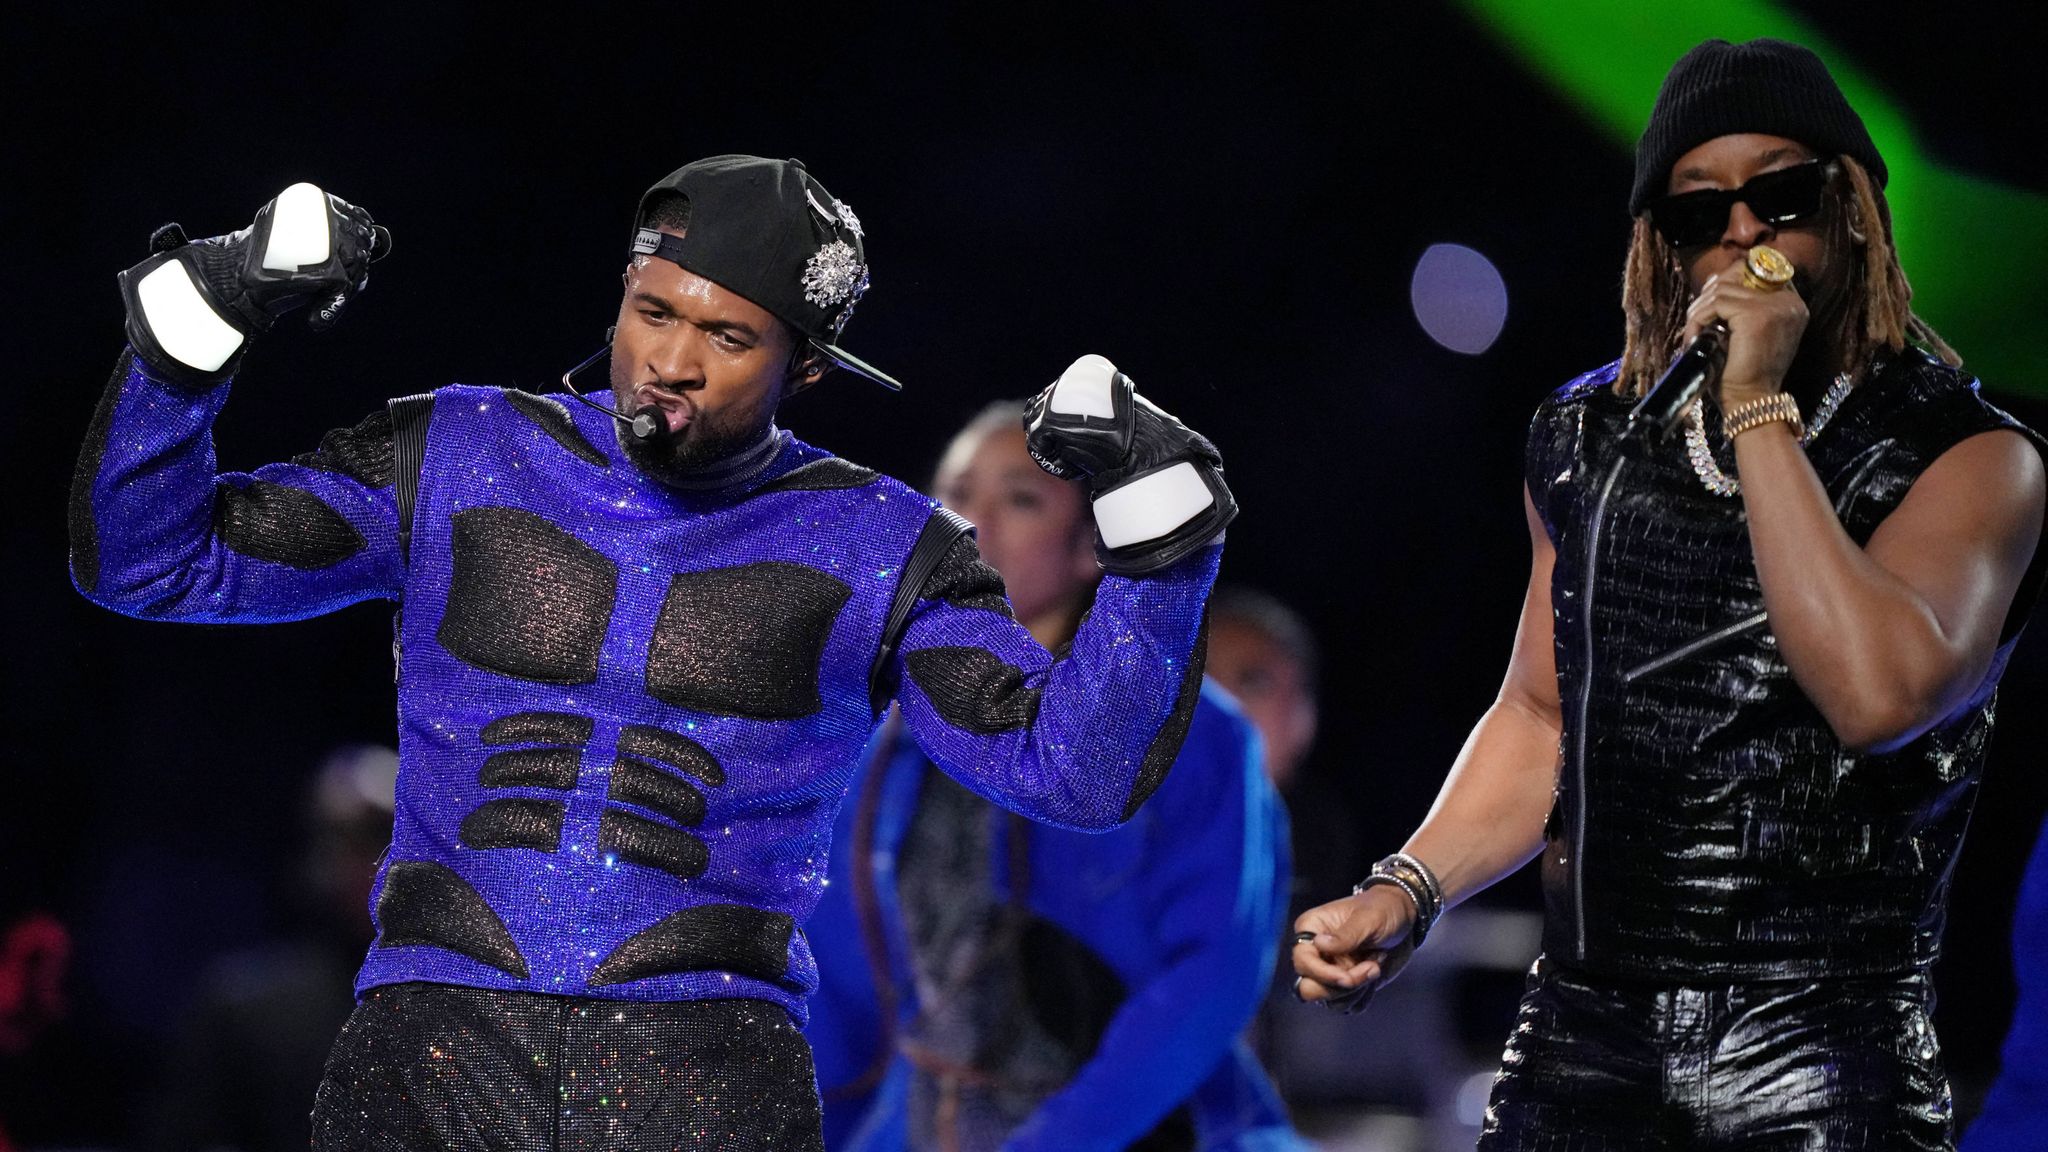 Usher and Lil John perform together. Pic: Kirby Lee-USA TODAY Sports/Reuters